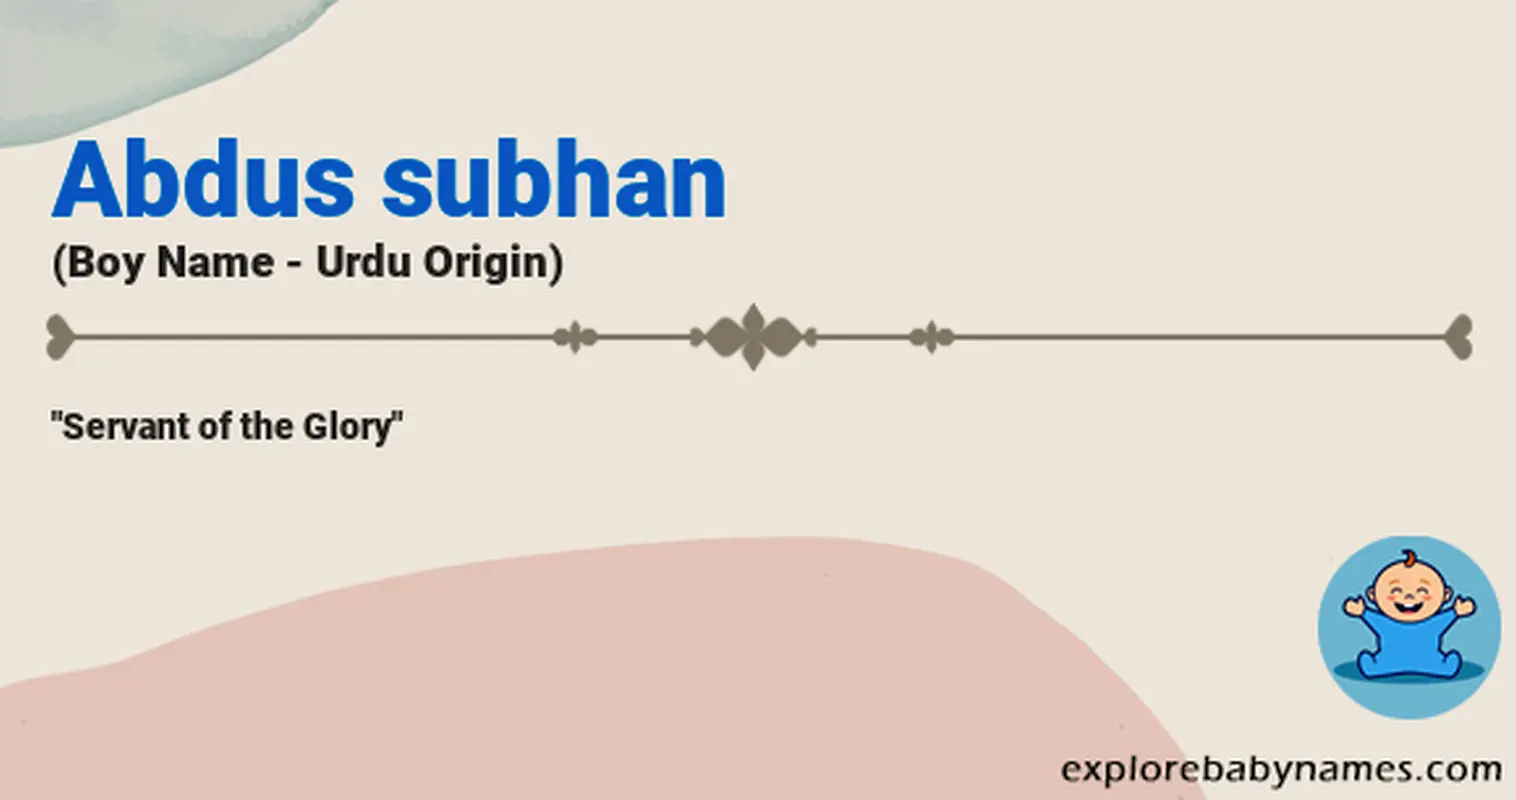 Meaning of Abdus subhan